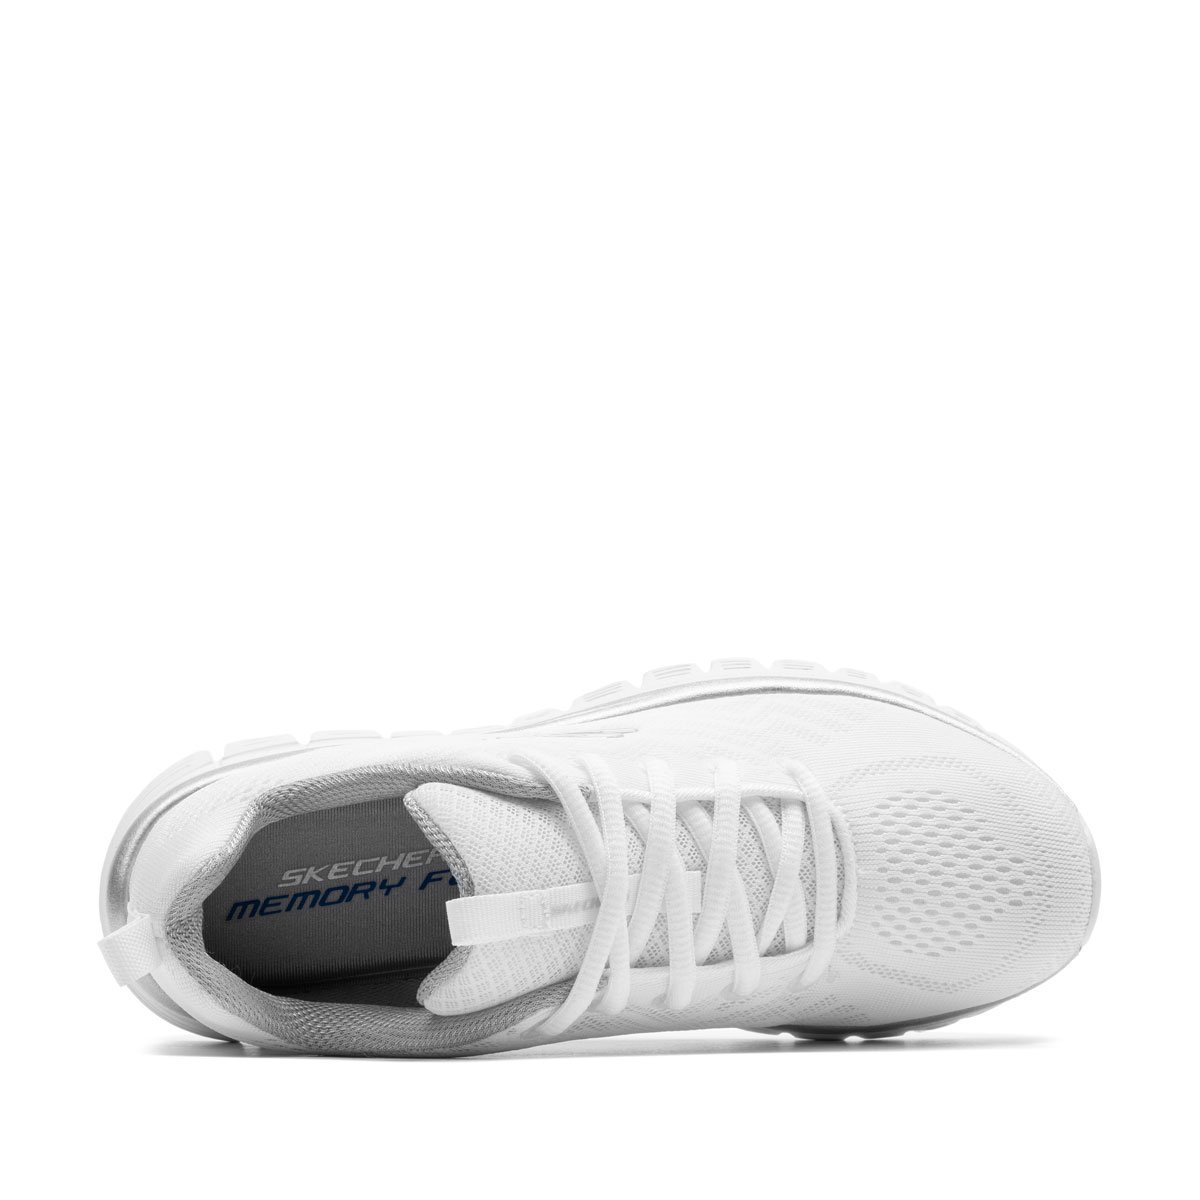 Skechers Graceful-Get Connected Дамски маратонки 12615-WSL